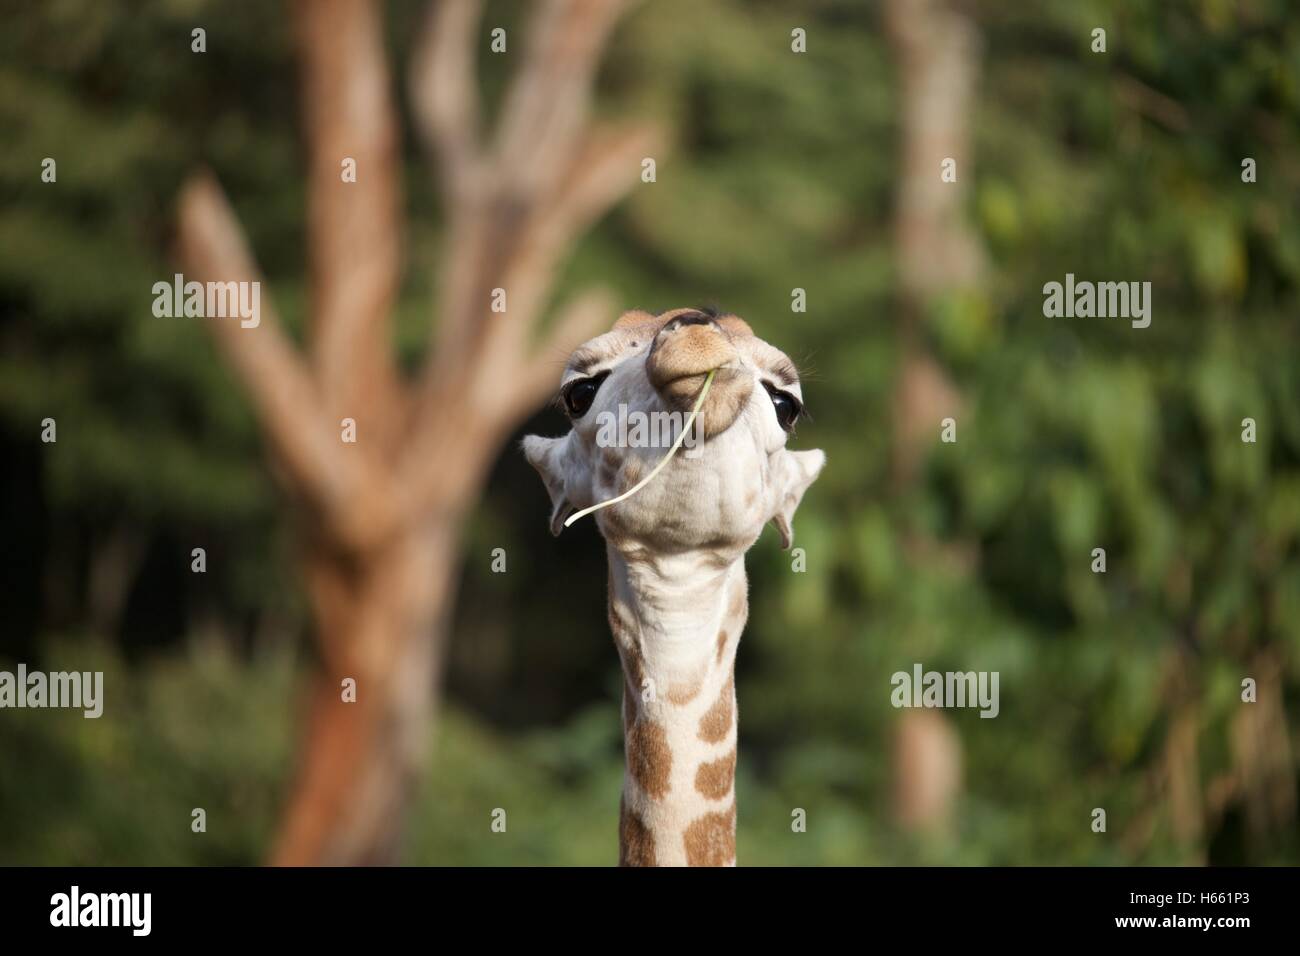 Baby giraffe looking at the camera while eating some greens Stock Photo